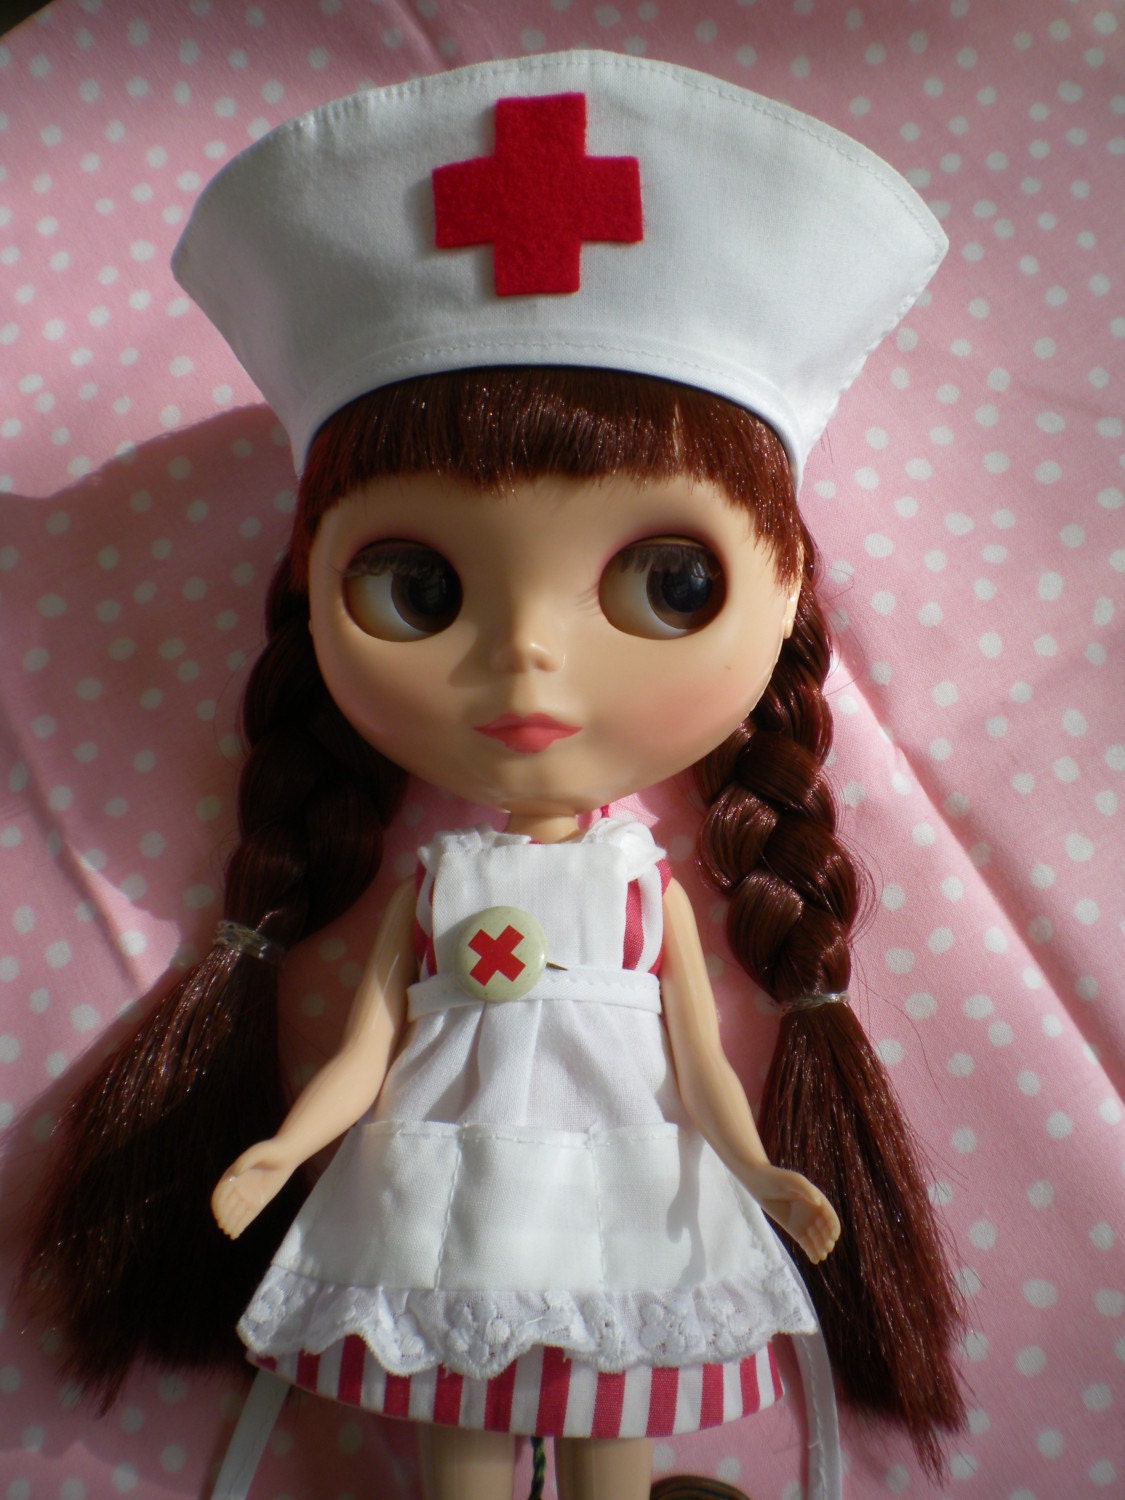 Nurse OUTFIT for Blythe Doll THREE piece Thin Red Stripes From ardentcurse